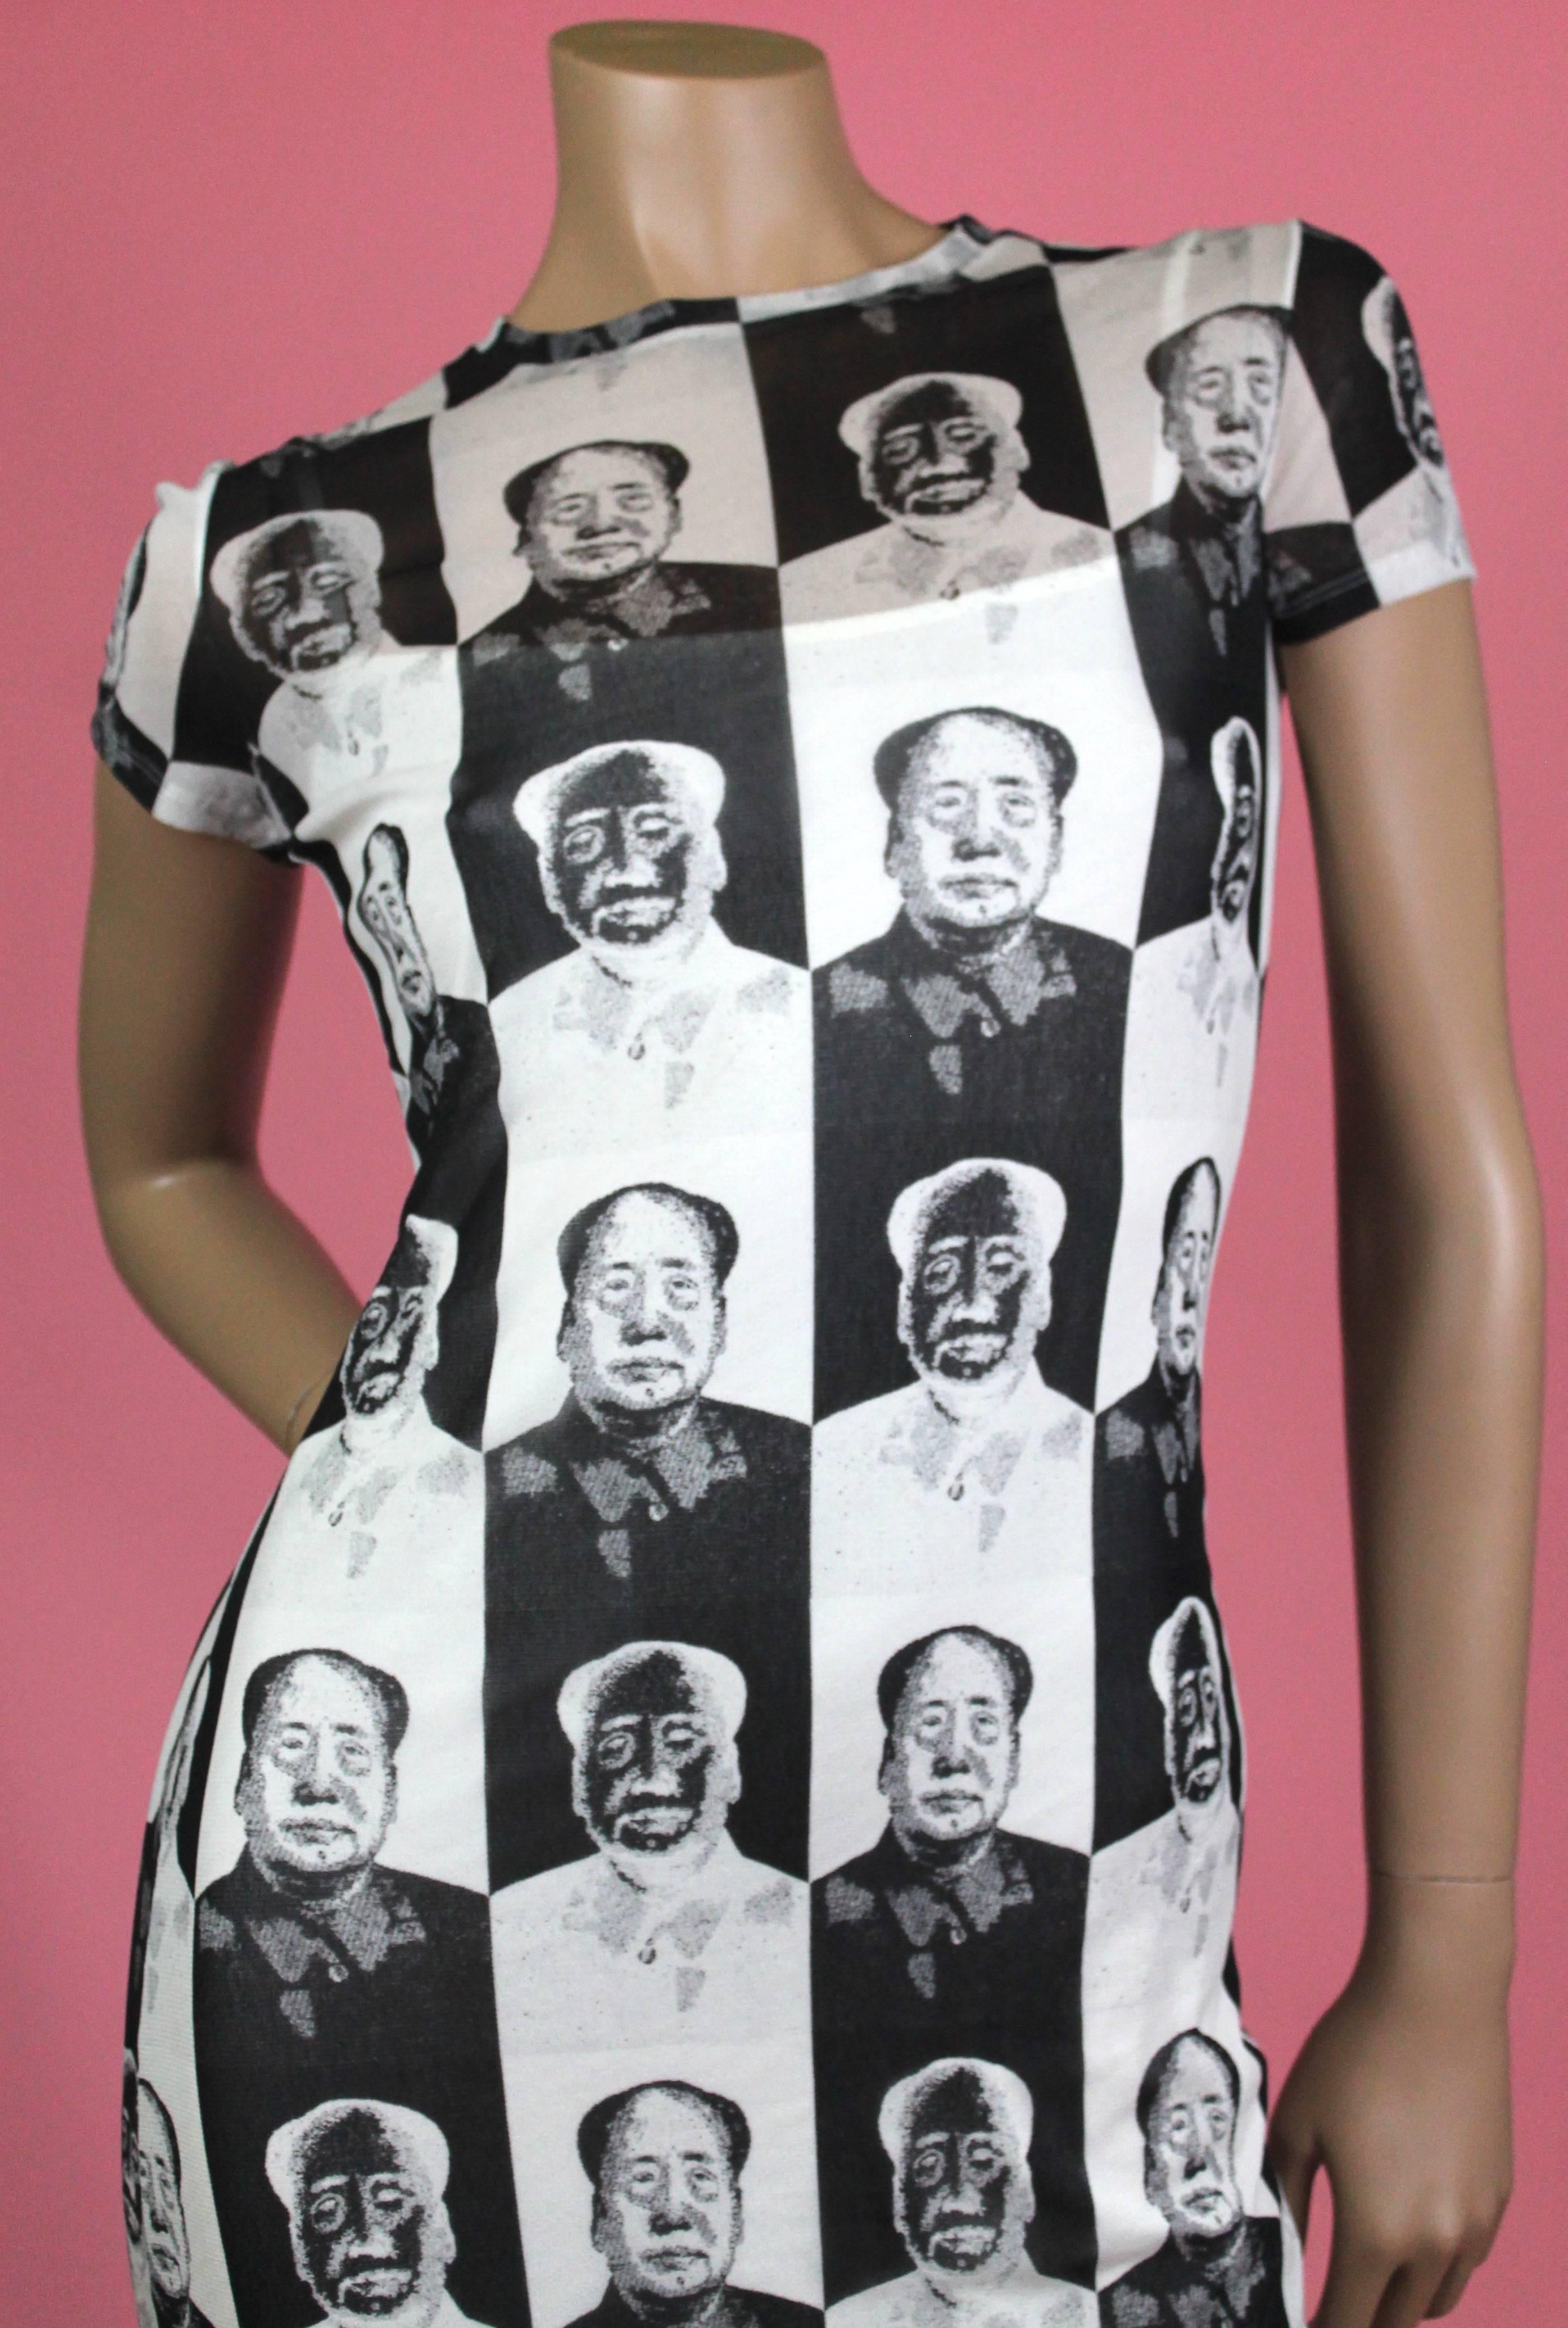 -Iconic piece from Vivienne Tam's Spring Summer 1995 collection reissued for Opening Ceremony
-Dress features Mao Zedong pop-art print by Chinese-American artist Zhang Hongtu. A motif that earned Tam her first mention in Vogue Magazine.
-The black